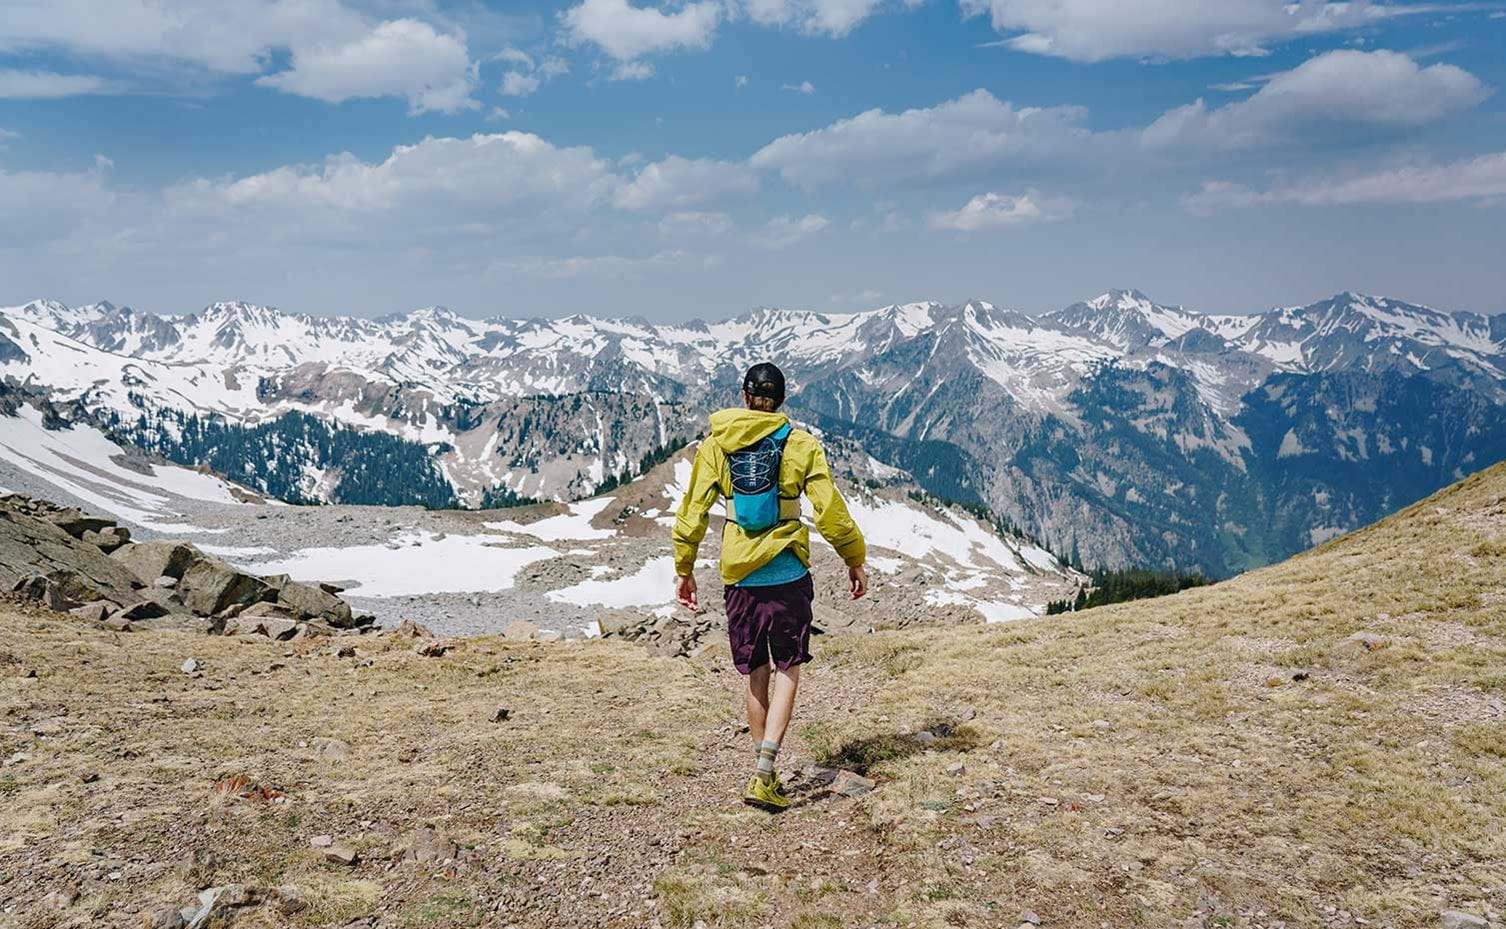 A hiker looking over the epic scenery near Aspen Snowmass